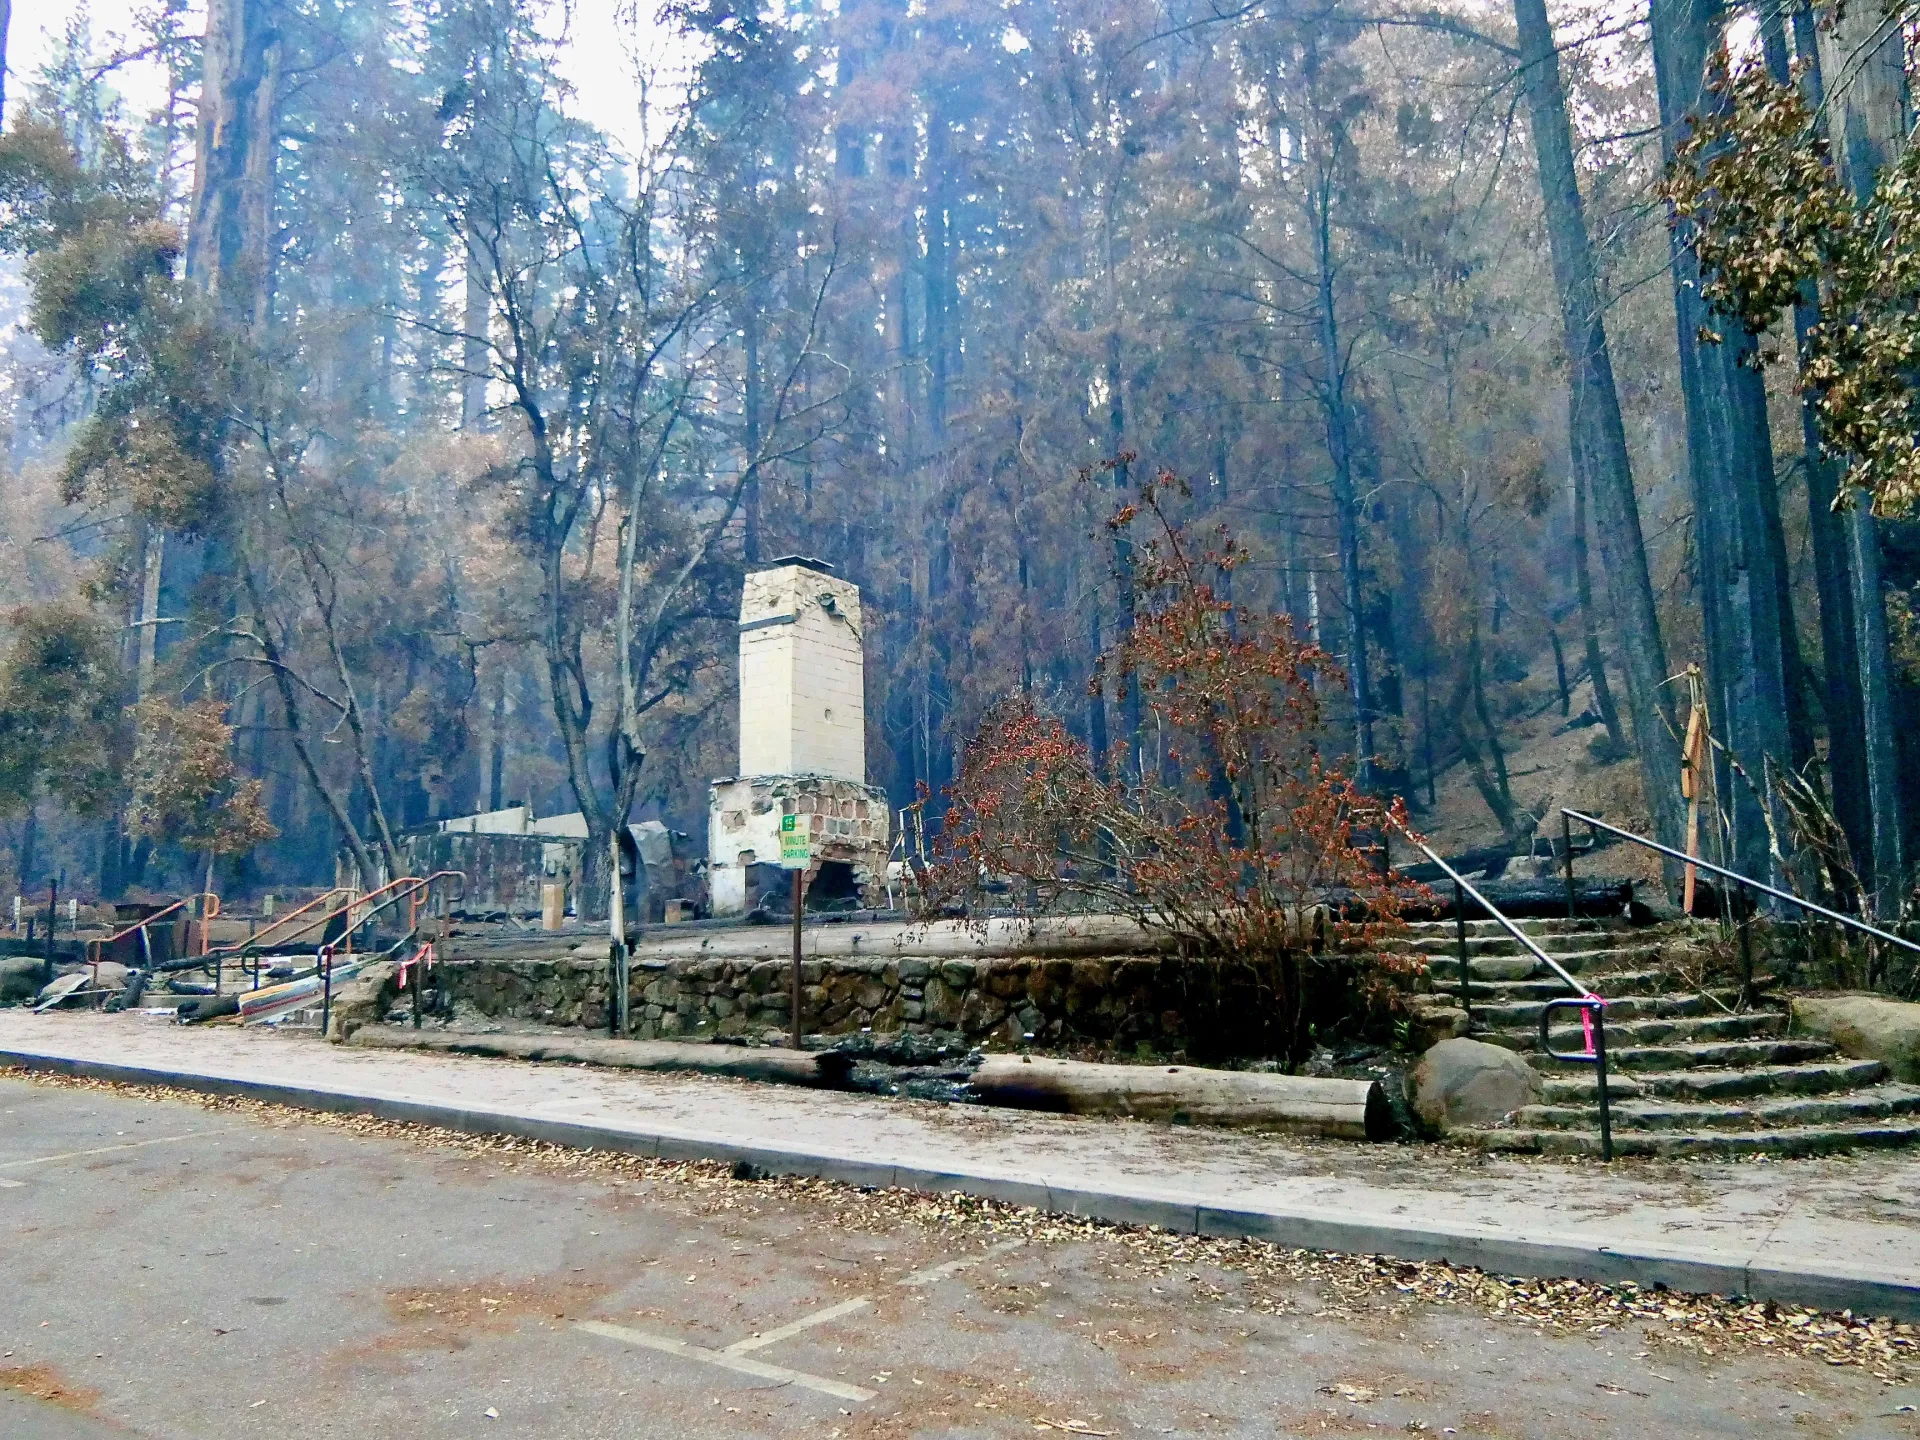 The 2020 CZU Lightning Complex Fire burned through 97% of Big Basin Redwoods State Park, destroying the historic visitor (seen above). Rebuilding a more climate-resilient park will require a team of climate experts working together to build climate resilience into all aspects of park management. 